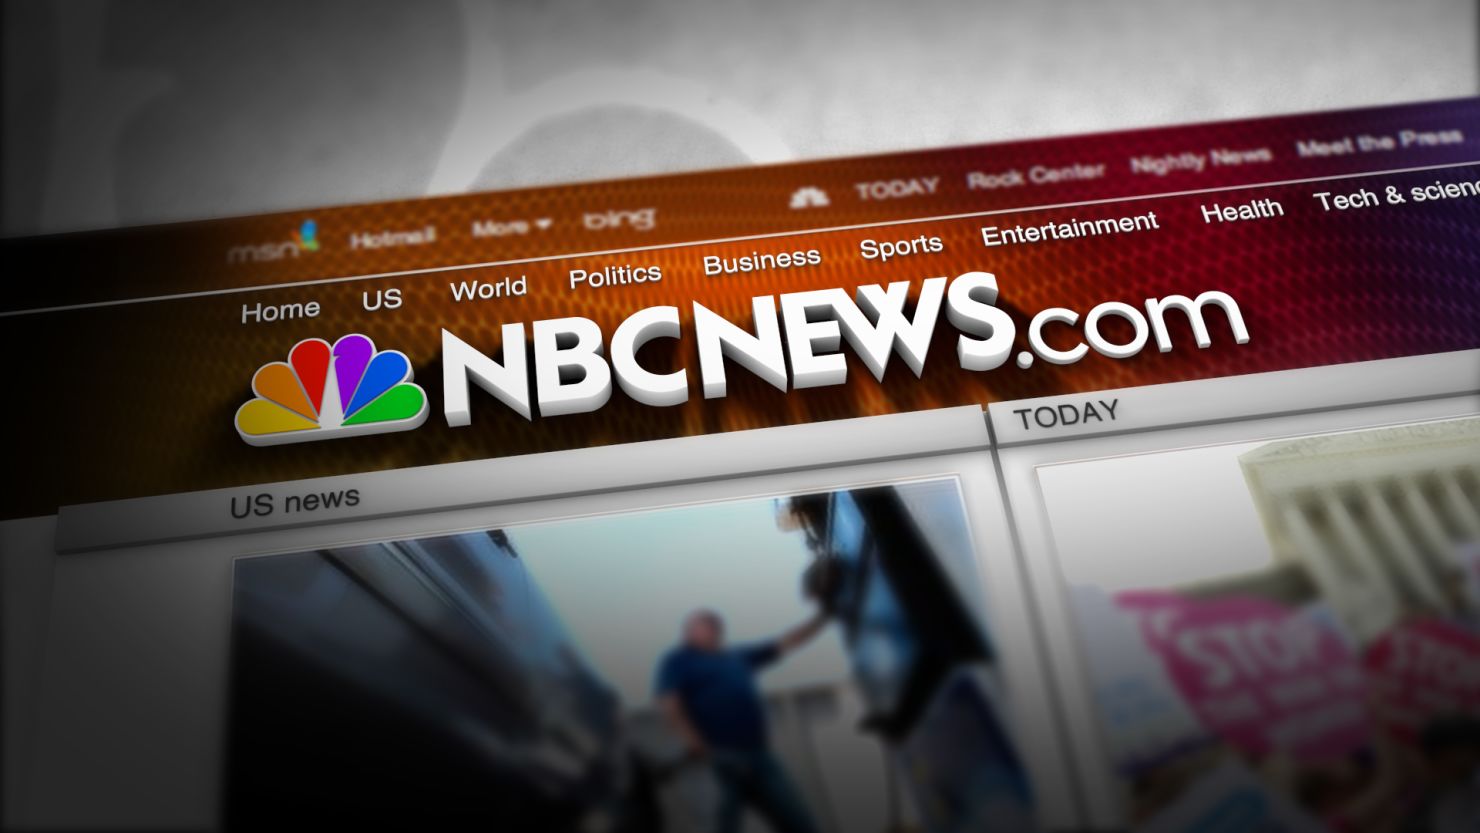 MSNBC.com changed its name on Monday to NBCNews.com following a split from Microsoft.